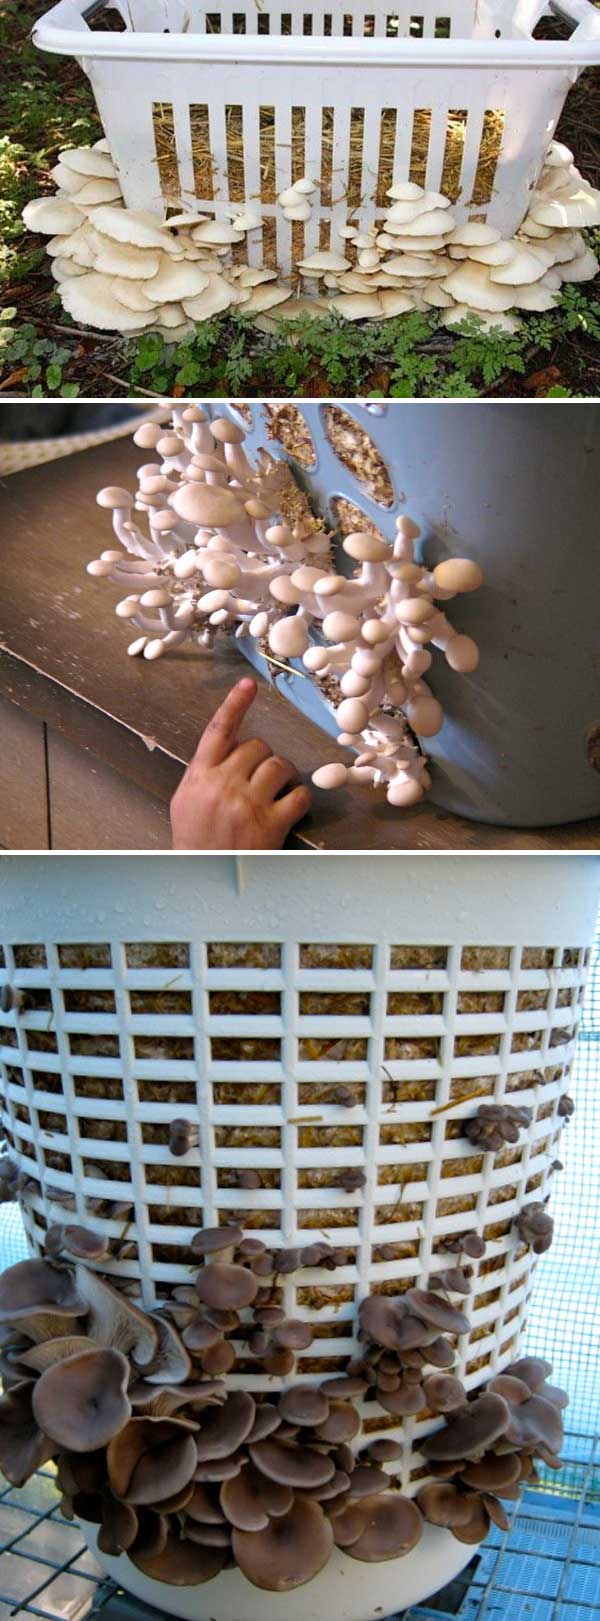 Grow Mushrooms in a Laundry Basket | Clever Gardening Ideas on Low Budget